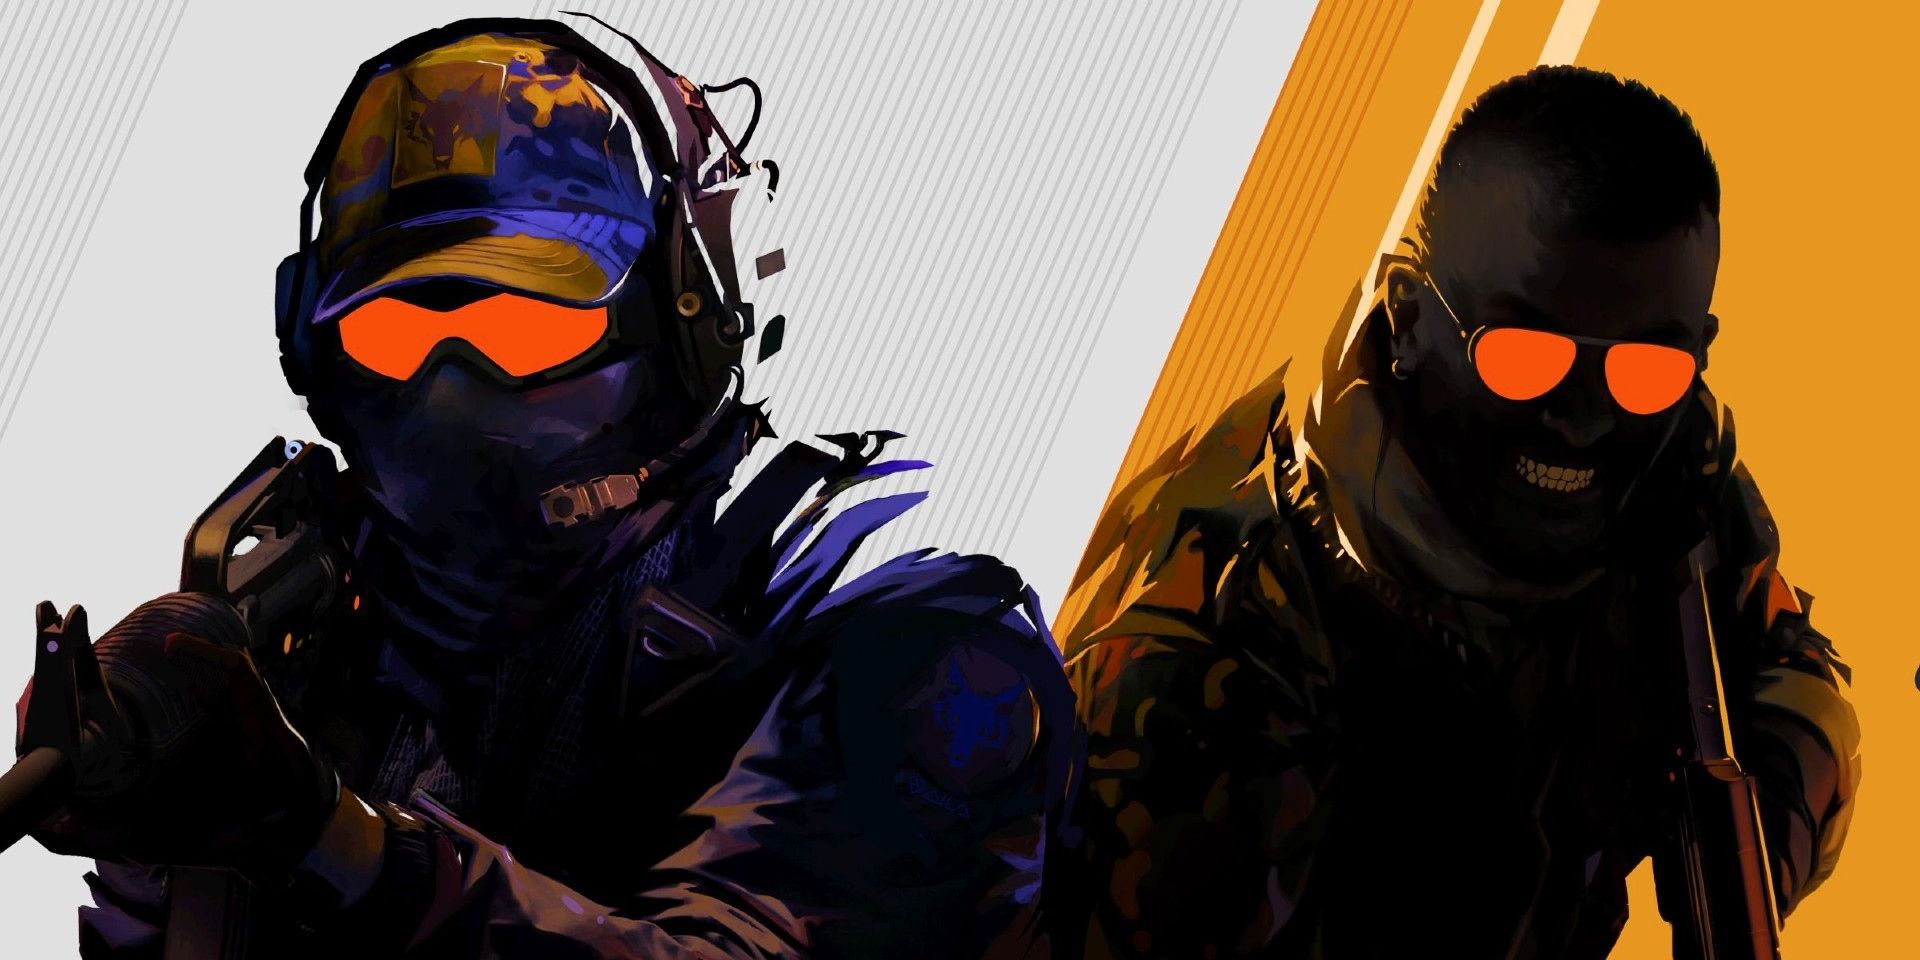 A crop of the official key-art for Counter-Strike 2, showing two agents. One is wearing a mask, tactical goggles, and a hat while aiming their rifle, while the second one uses aviator shades and clenchs their teeth while holding a gun.